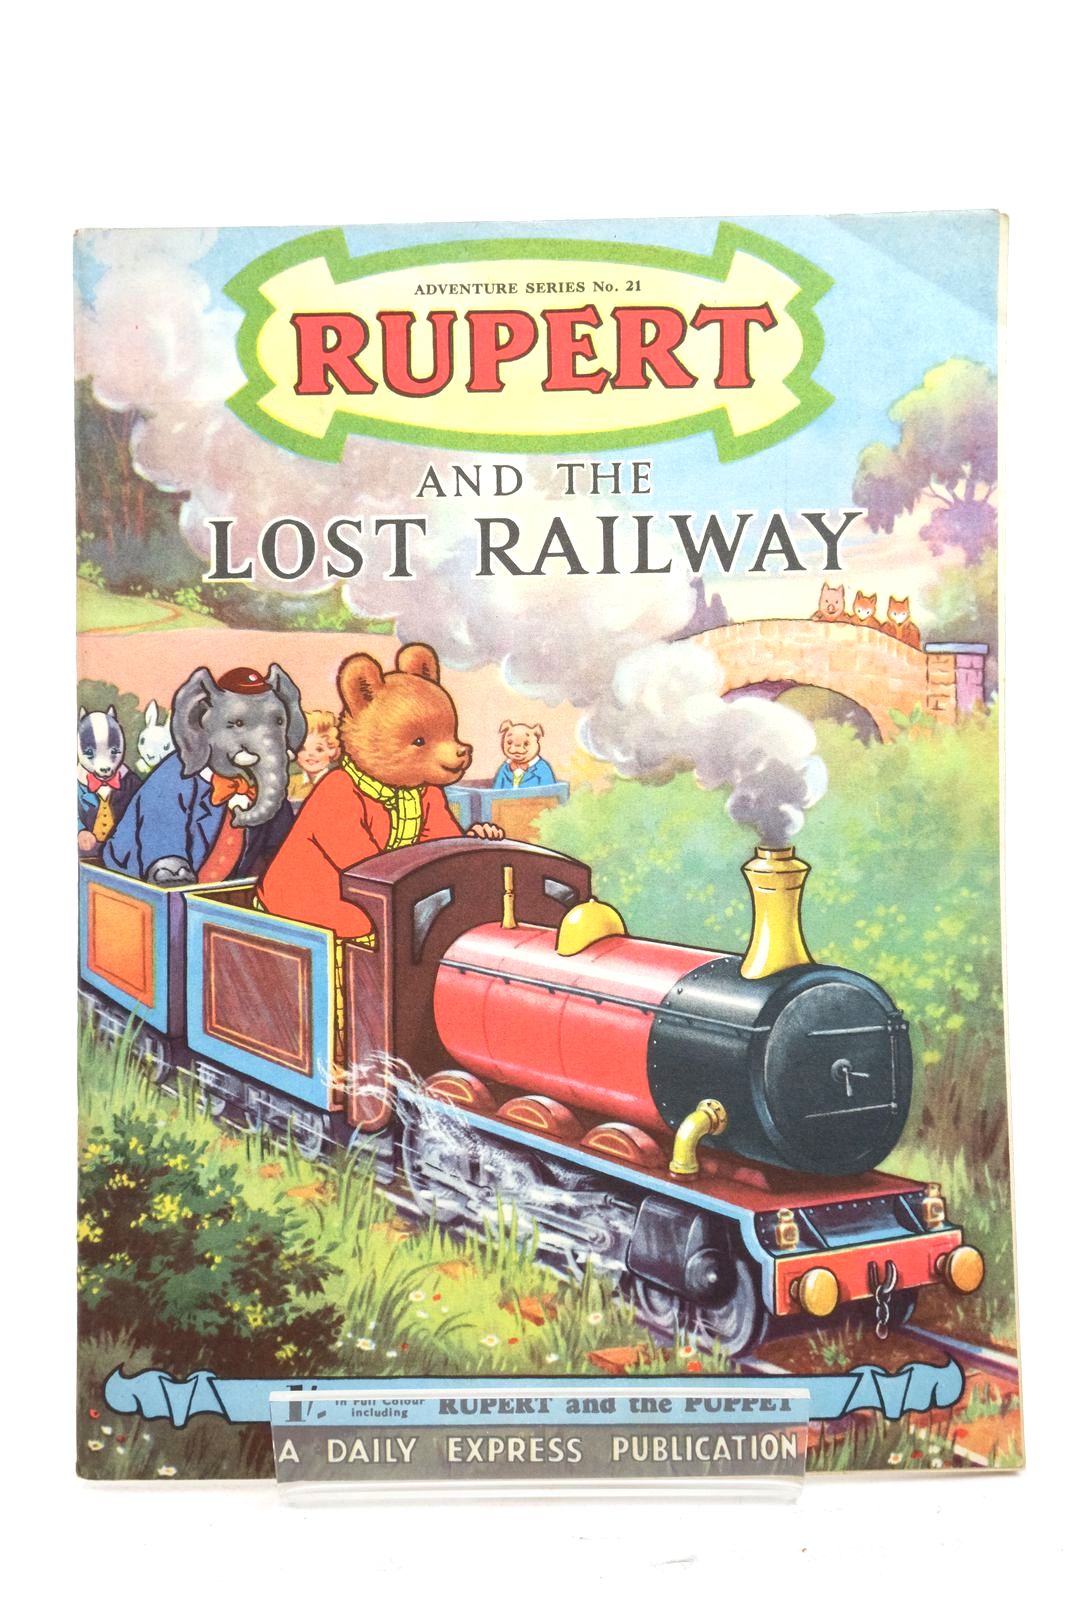 Photo of RUPERT ADVENTURE SERIES No. 21 - RUPERT AND THE LOST RAILWAY written by Bestall, Alfred published by Daily Express (STOCK CODE: 2136971)  for sale by Stella & Rose's Books